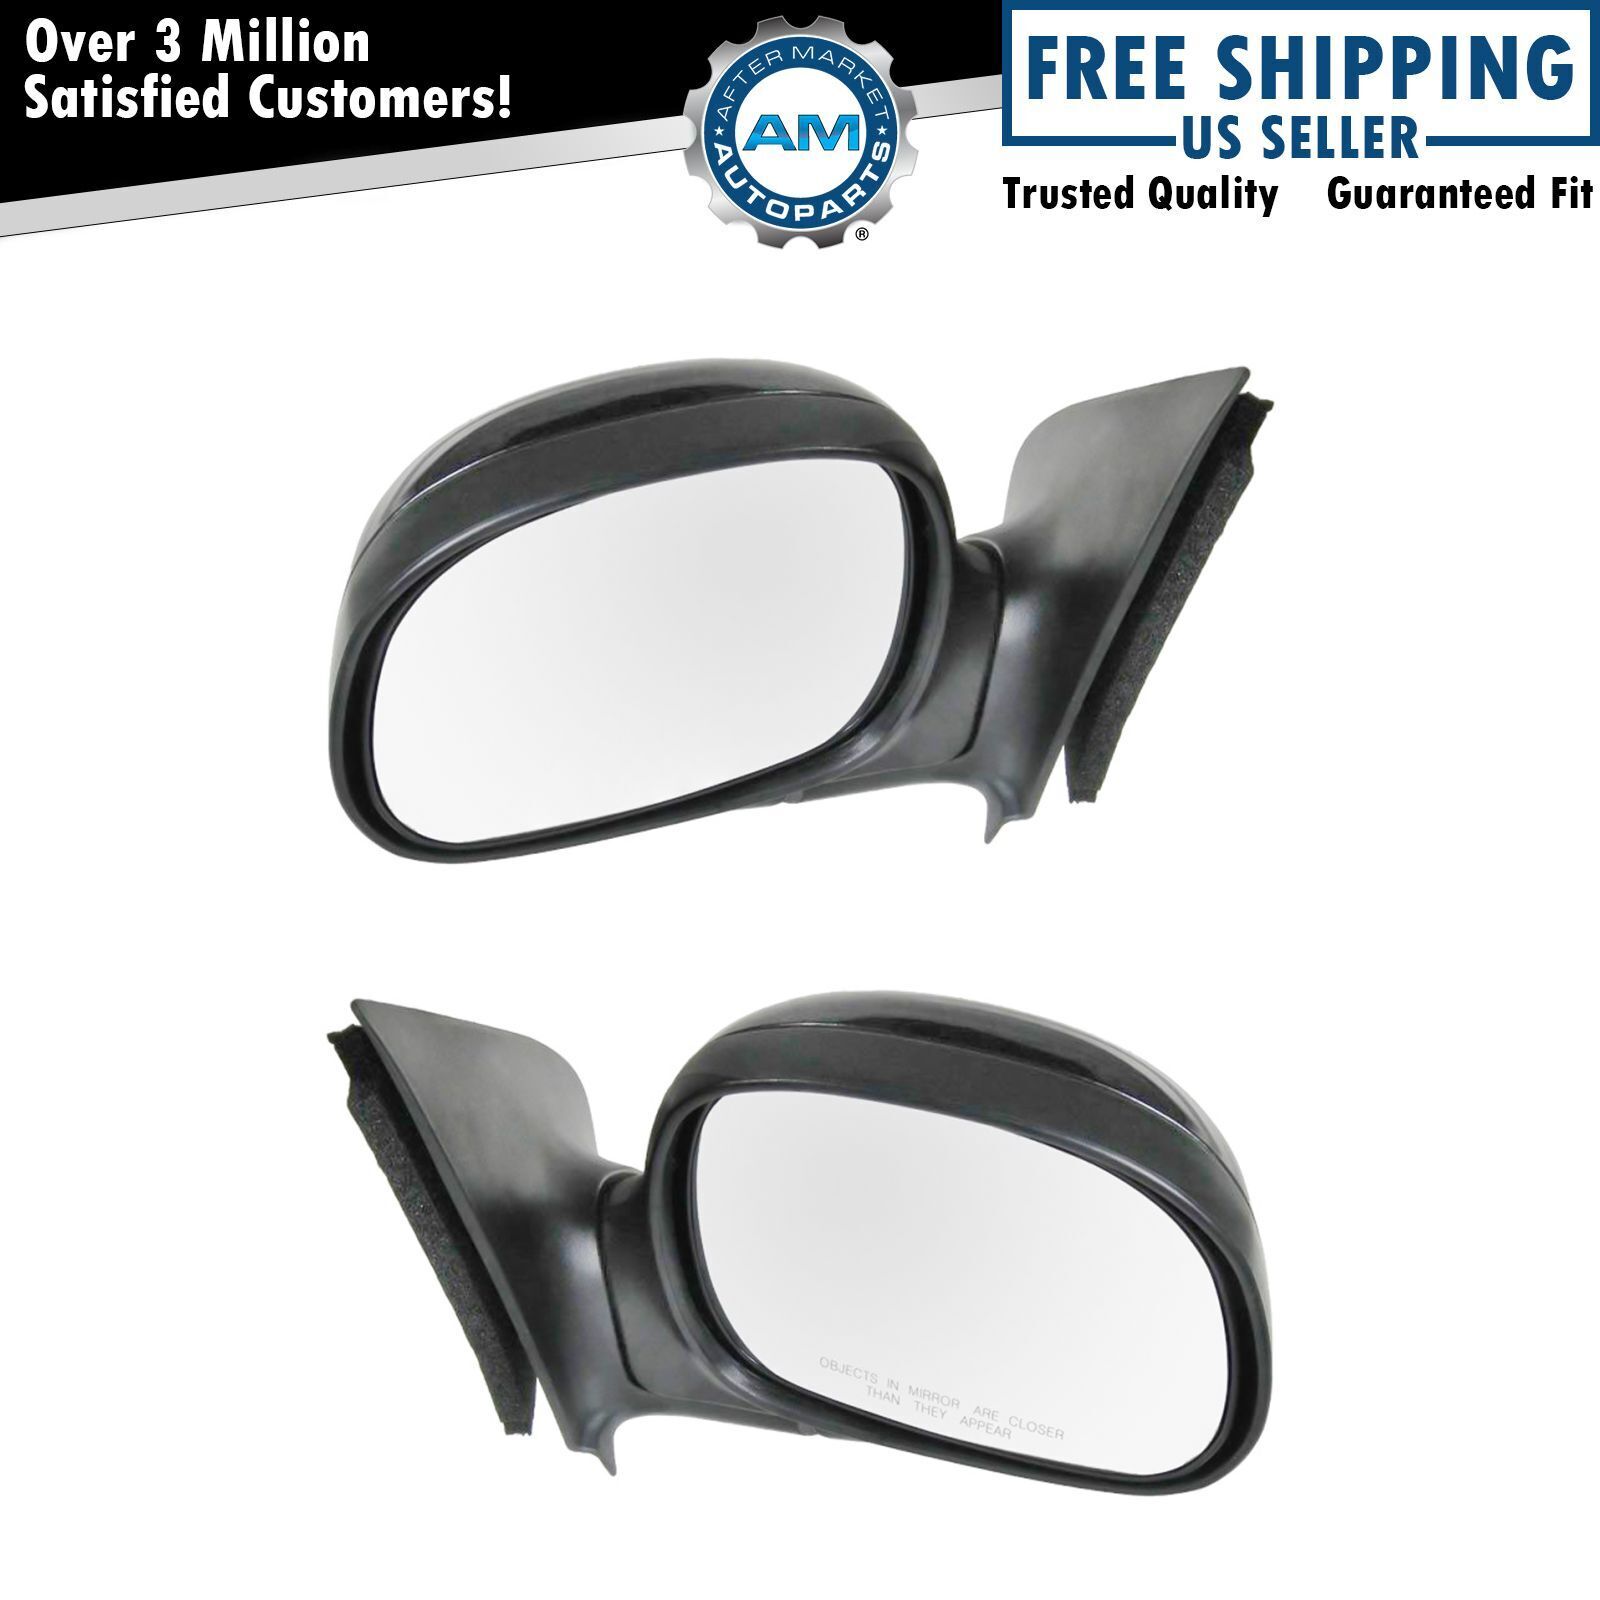 Black Manual Side Mirror Pair Set of 2 LH & RH for Ford F150 F250 Pickup Truck